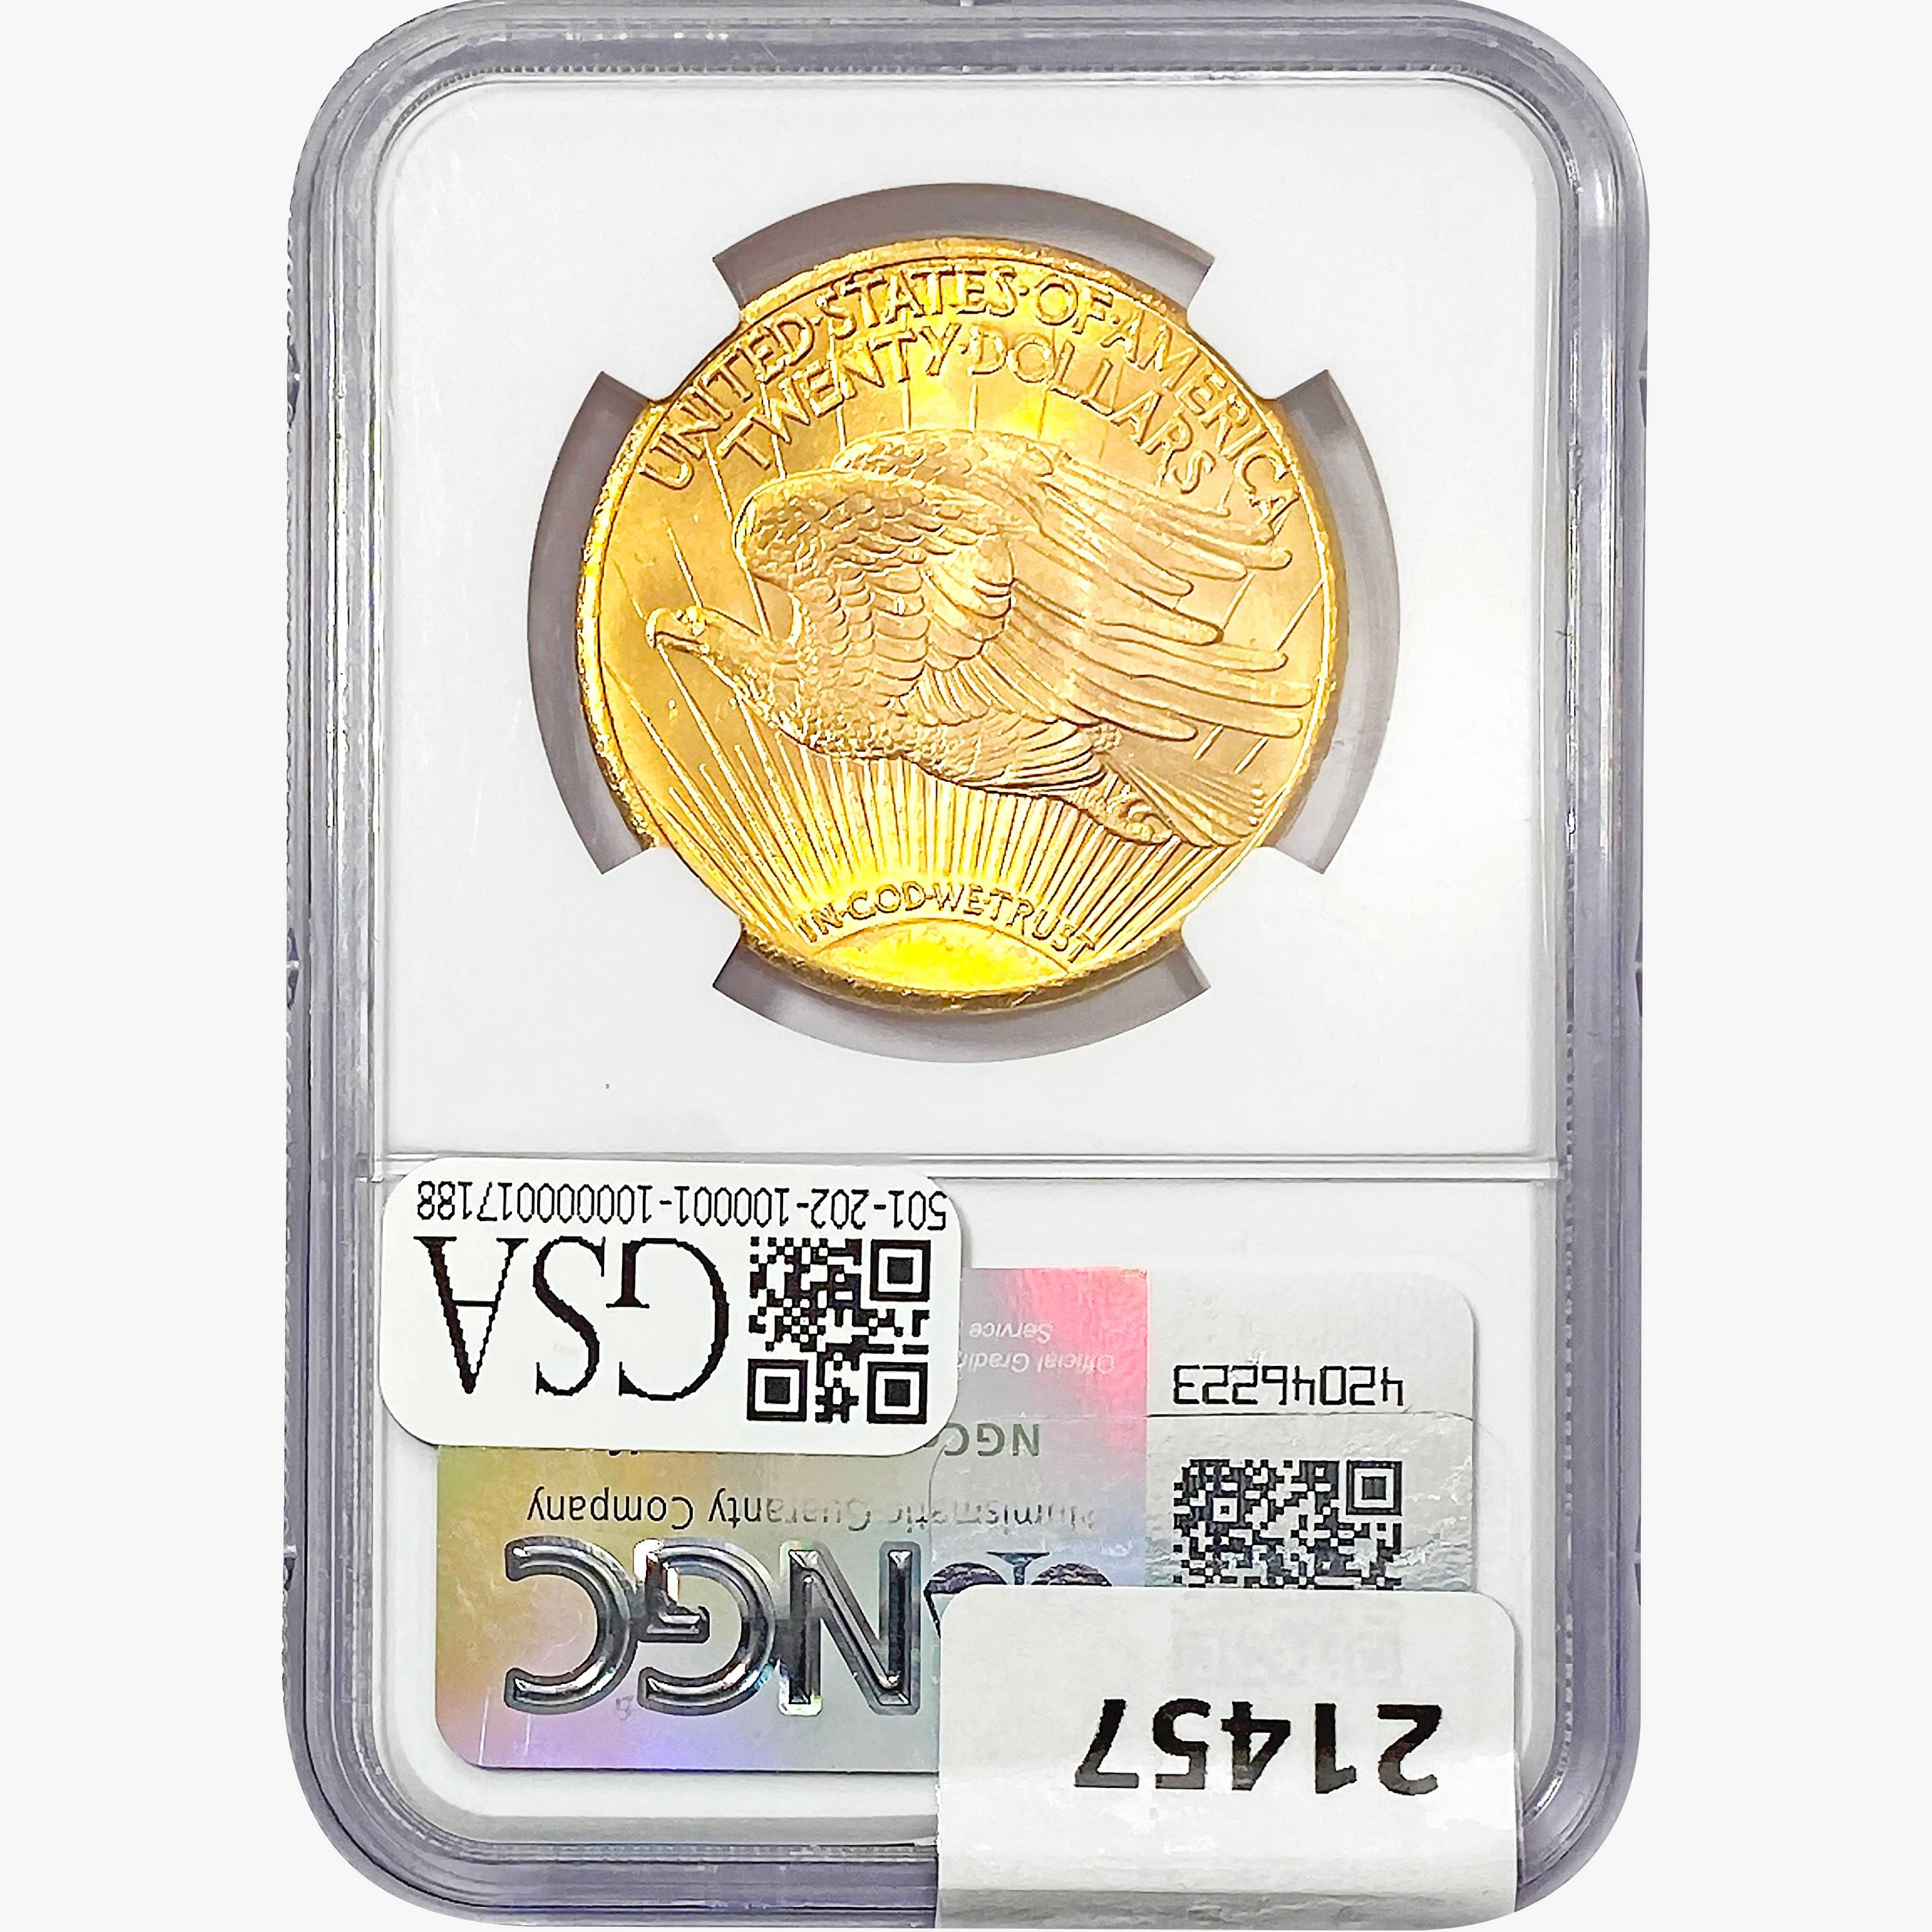 1928 $20 Gold Double Eagle NGC MS65